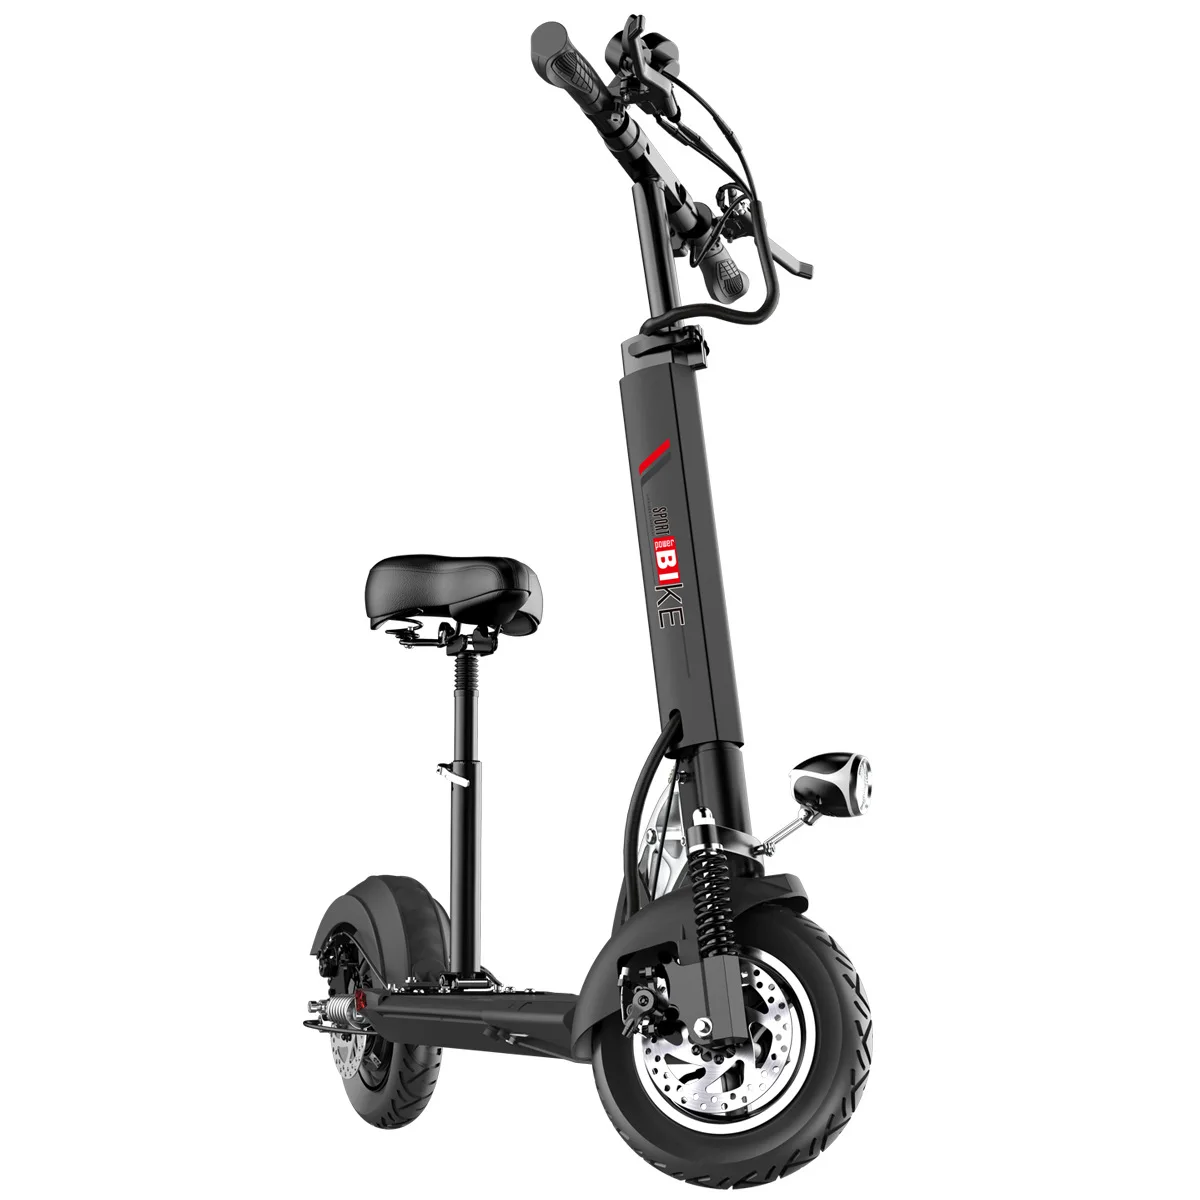 2022 New 48V 13ah 500W Dual Motor 1000W Cheap Price Adult Wide Wheel Fat Tire Pro Powerful Electric Scooter from China